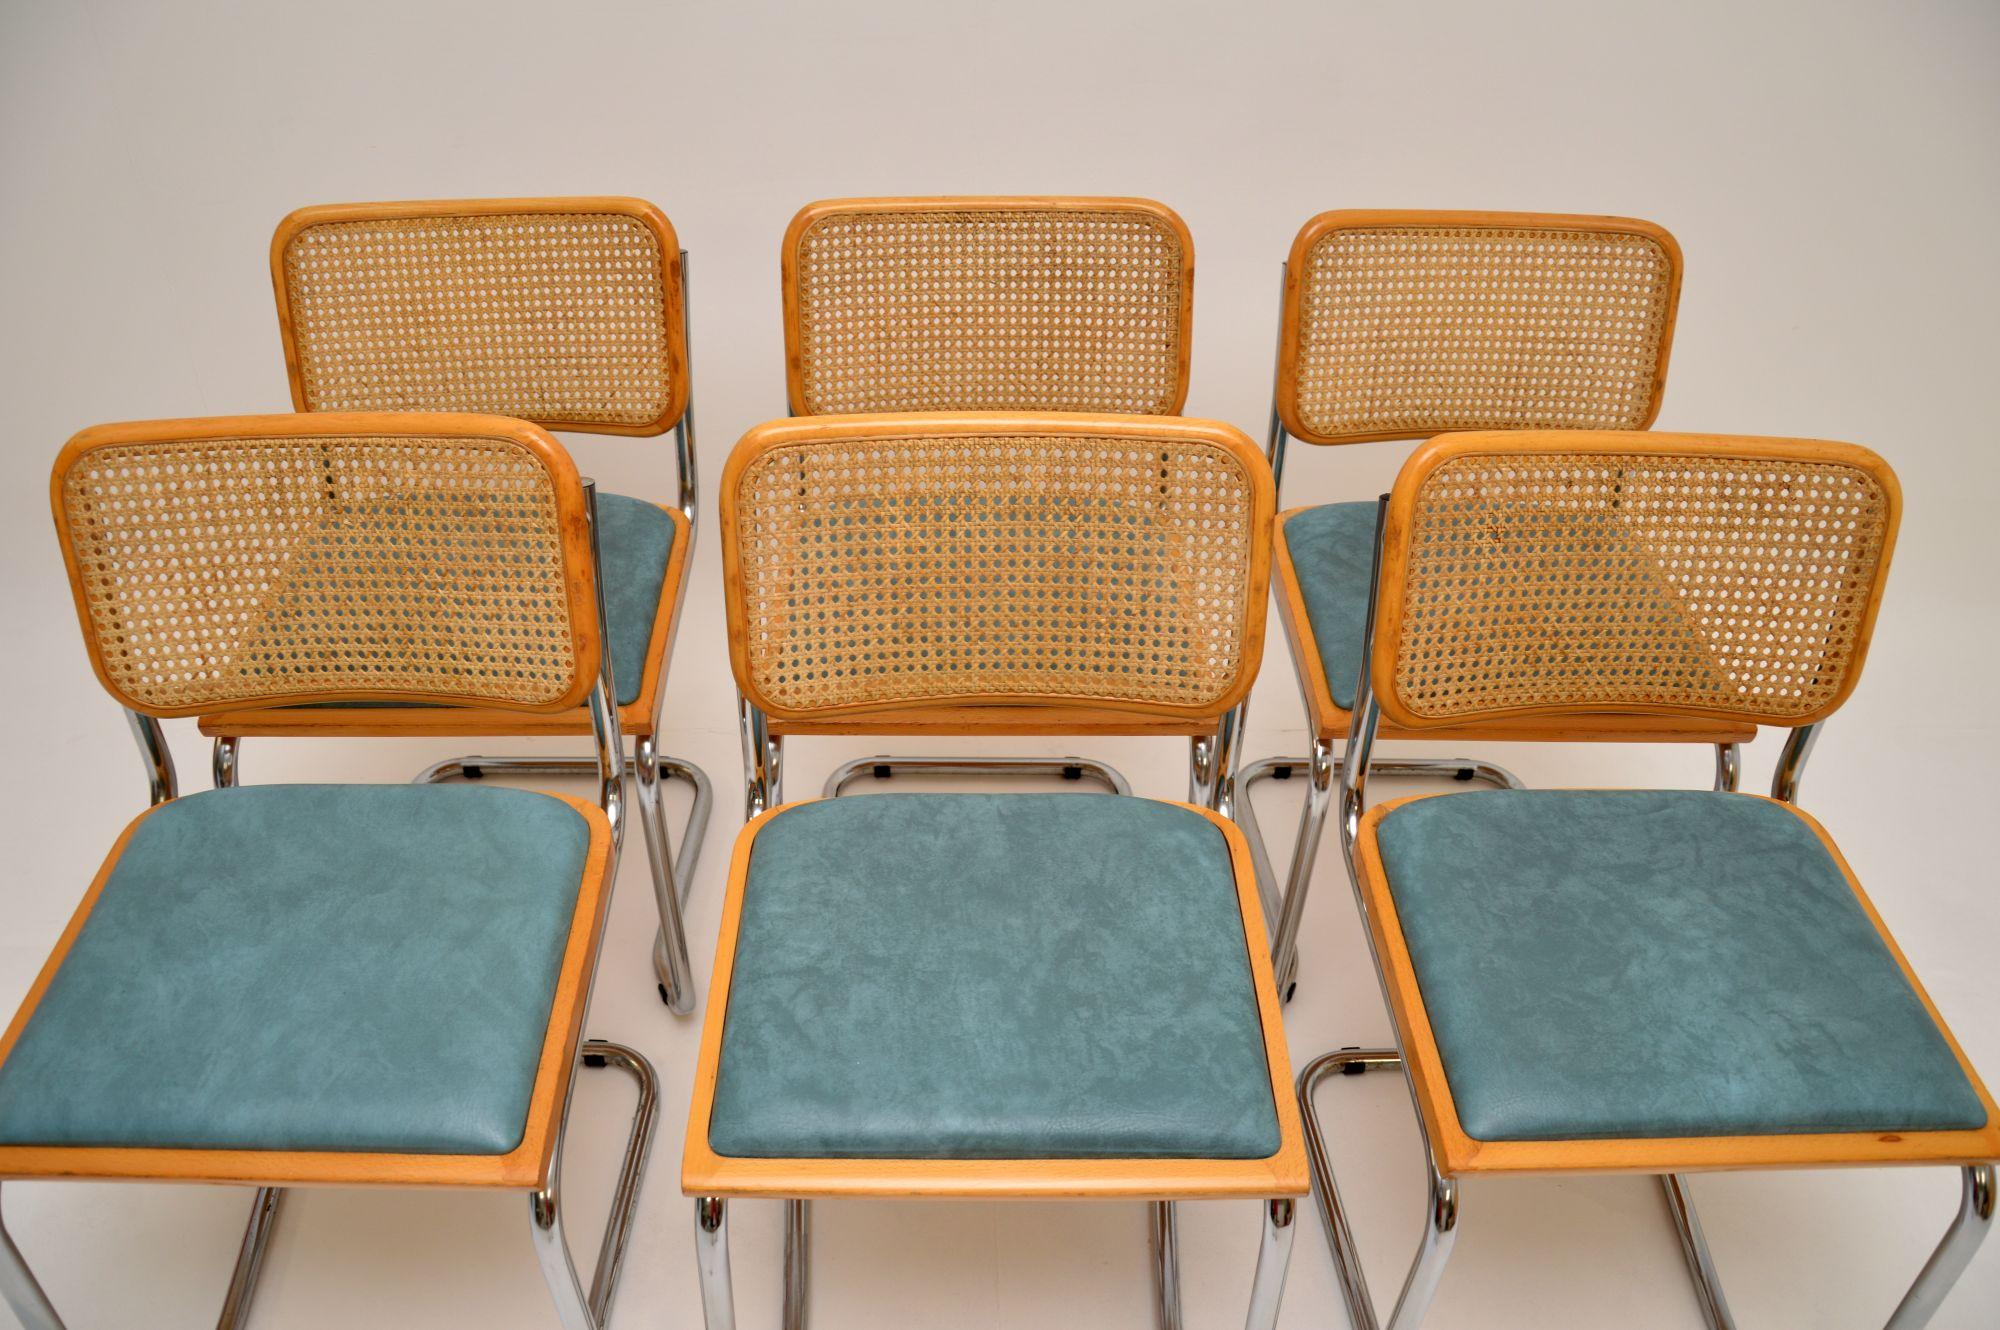 A stylish and iconic set of six vintage ‘Cesca’ dining chairs, originally designed by Marcel Breuer in the 1920’s. These were made in Italy, they date from around the 1970’s.

They are extremely well made, and are very comfortable, the cantilevered